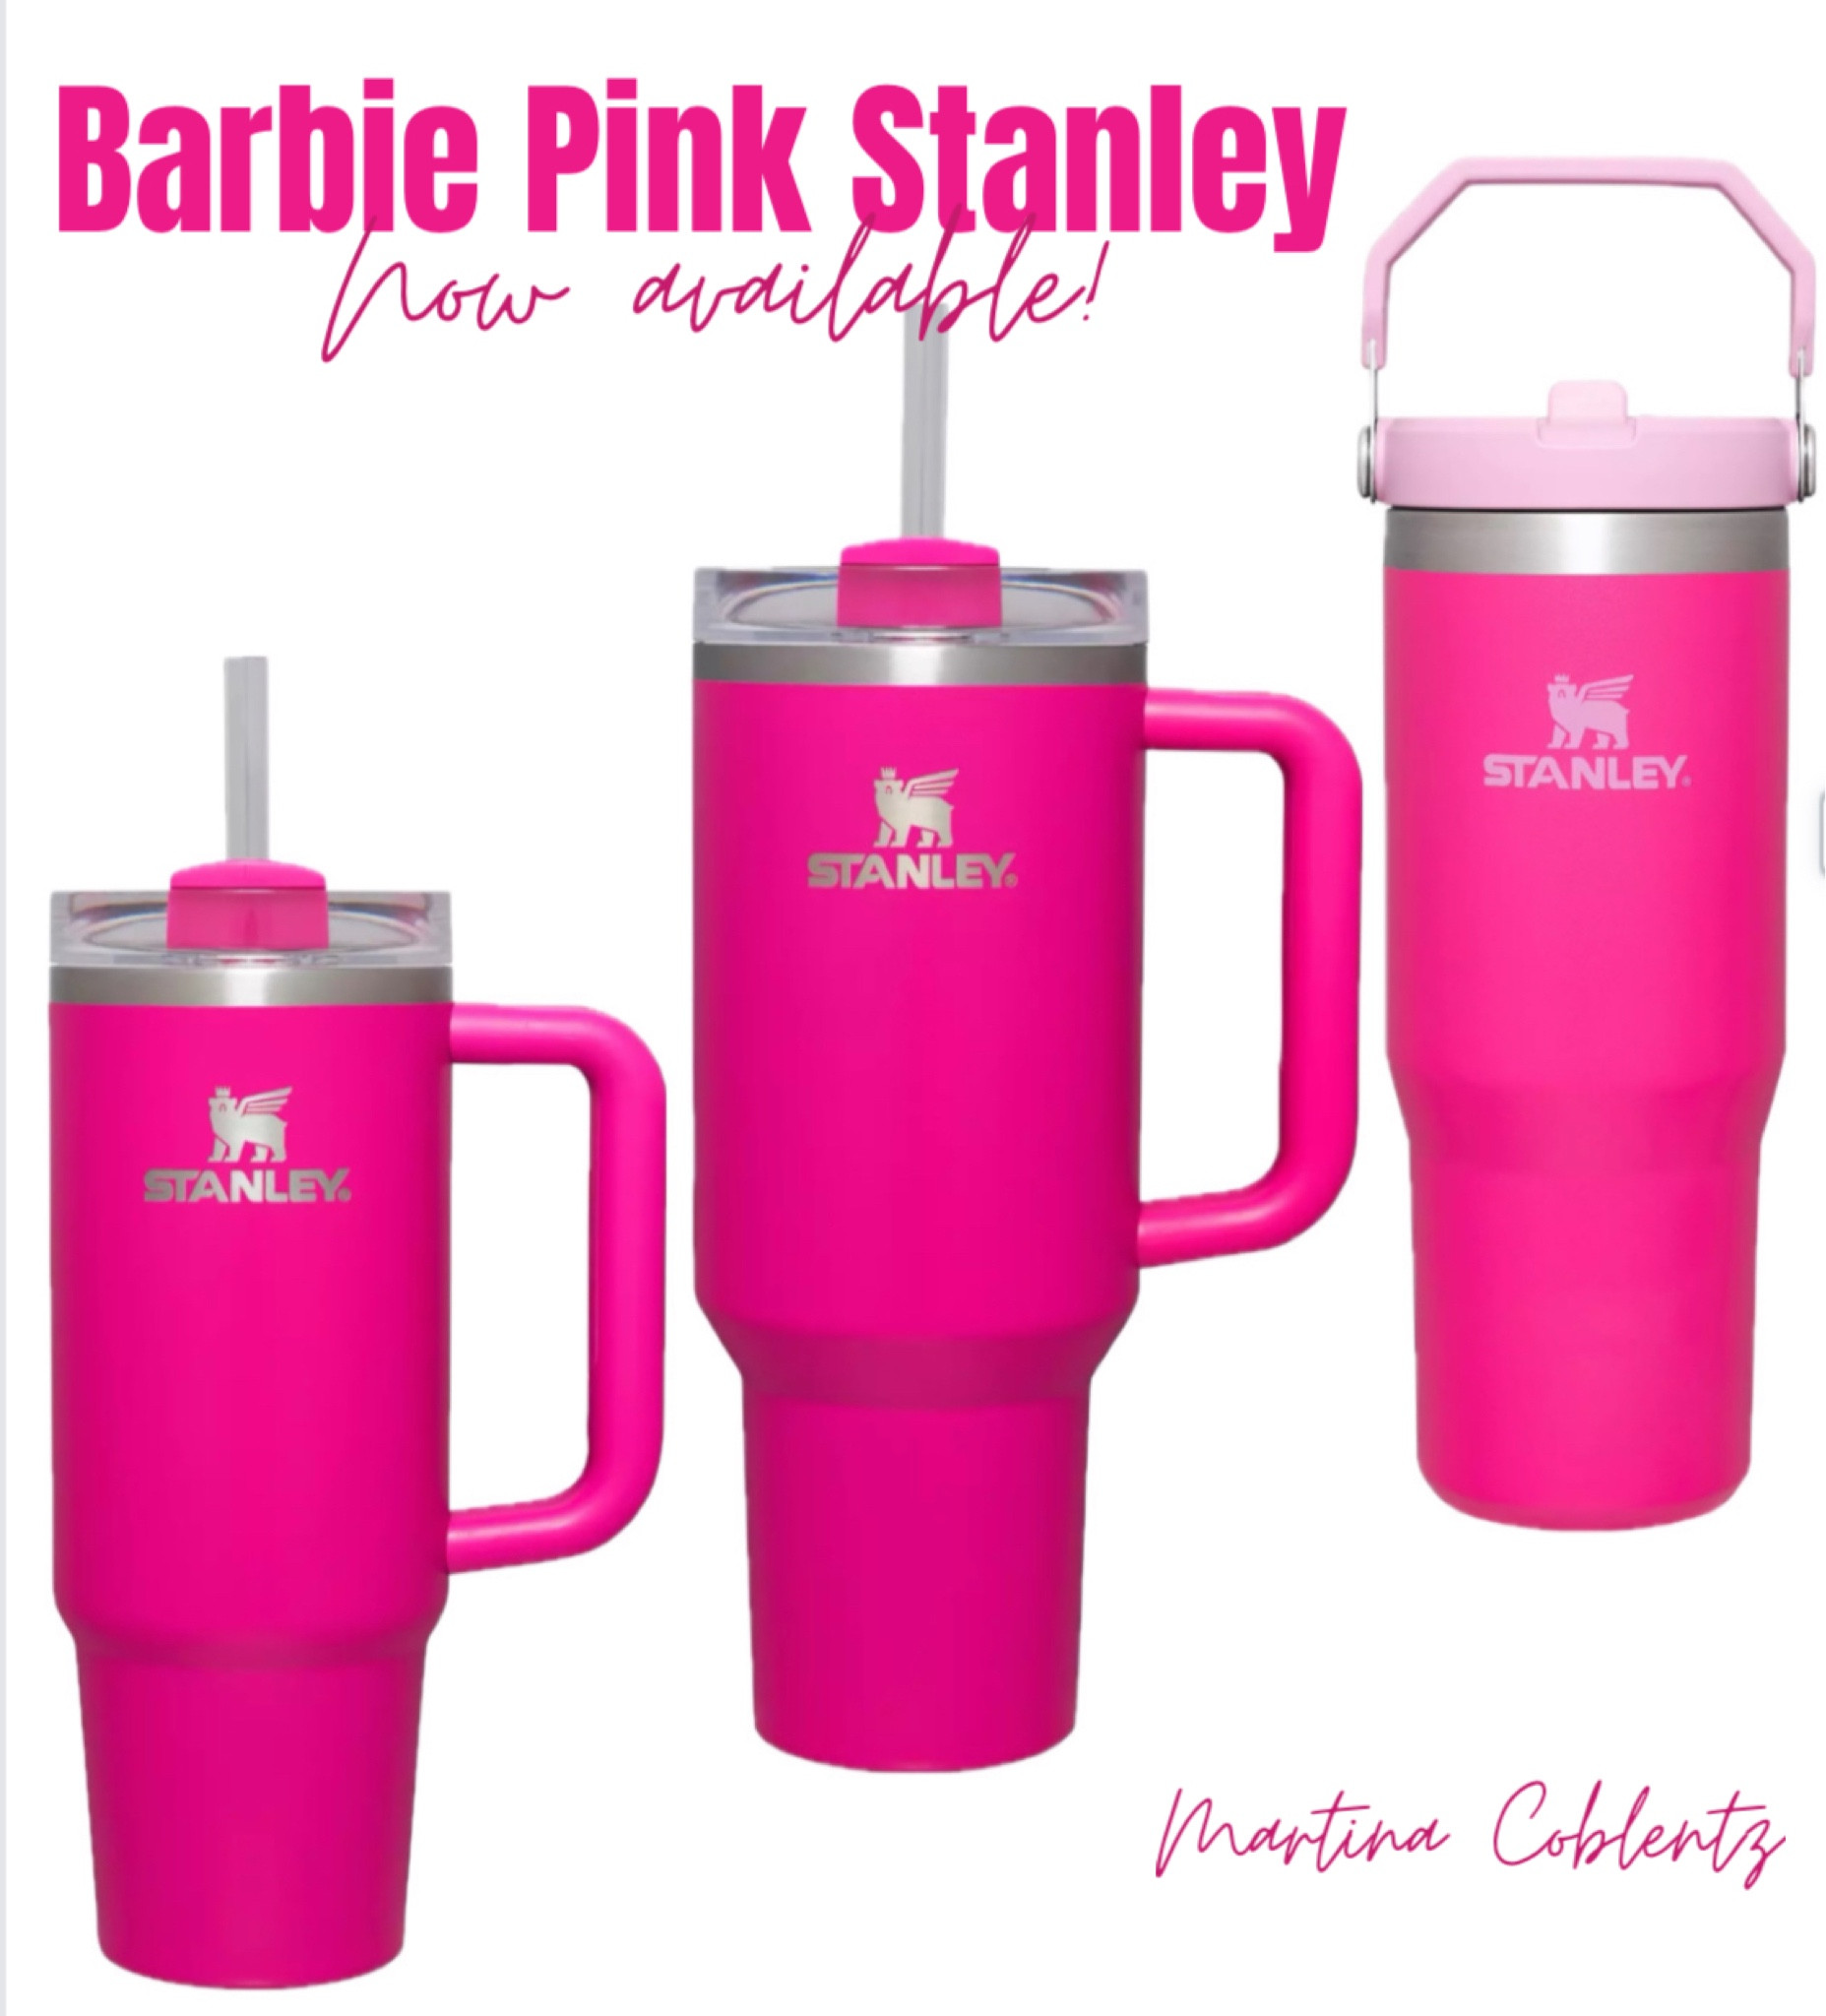 Barbie Pink Dune Quencher H2.0 40oz Rare Starbucks Tumblers With Handle,  Lid, And Straw Insulated Stainless Steel Coffee Termos Tumler For Car, DHL  Shipping, US Stock From Bestdeals, $4.64